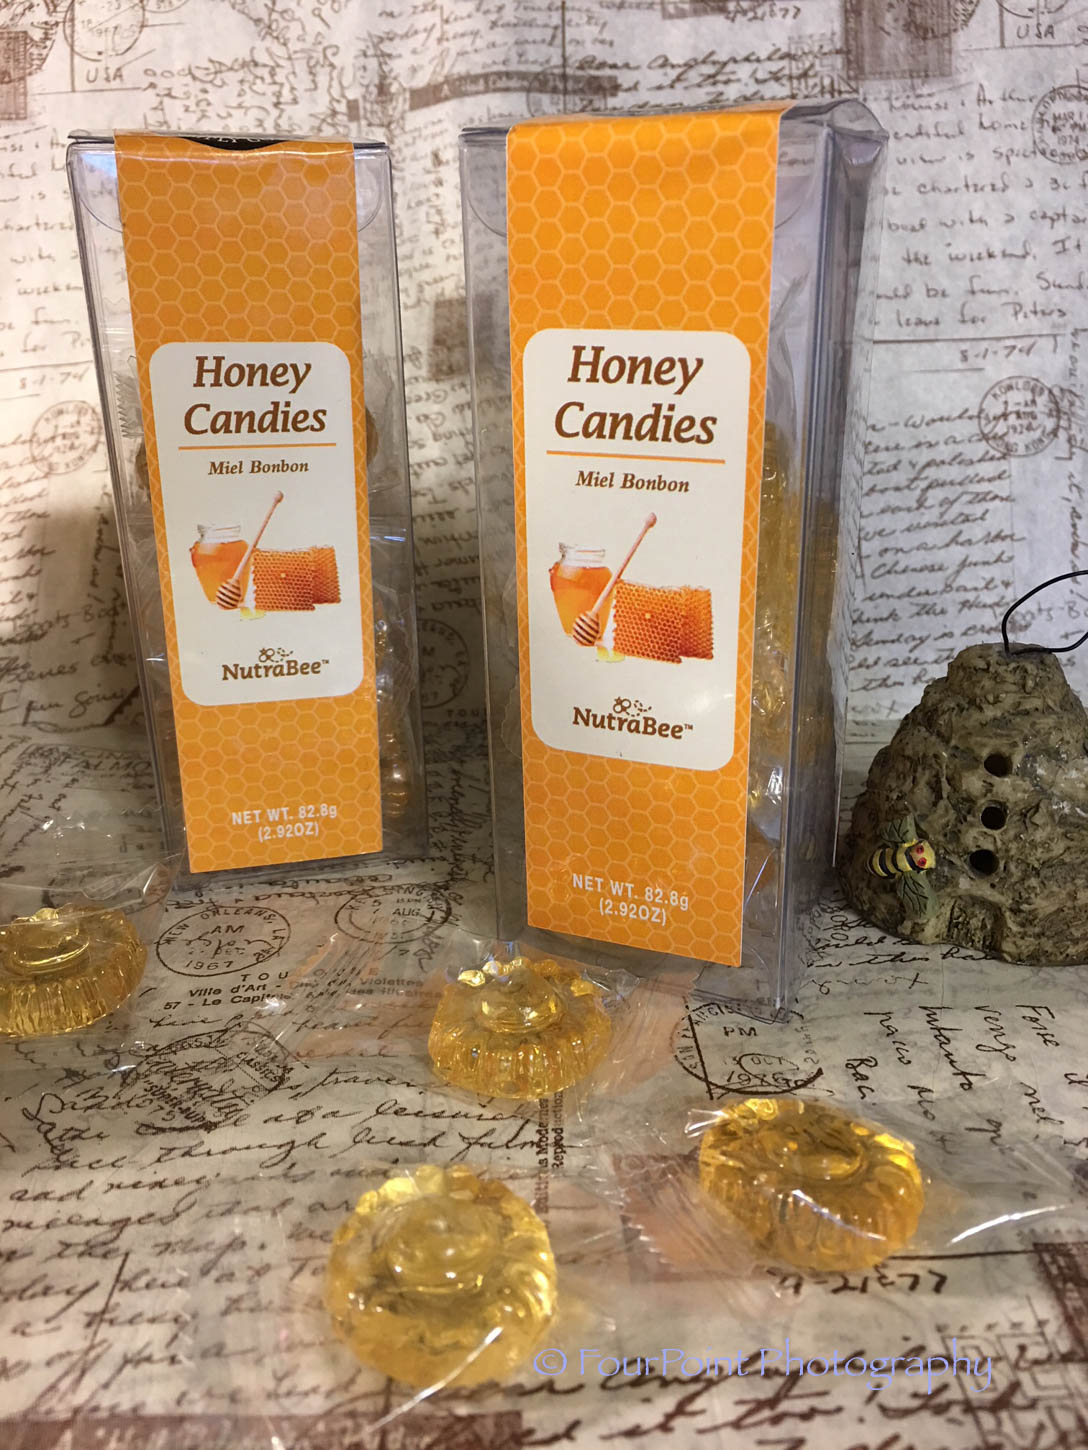 Honey-Candies, The-Beehive, FourPoint-Photography, Commercial-Photography